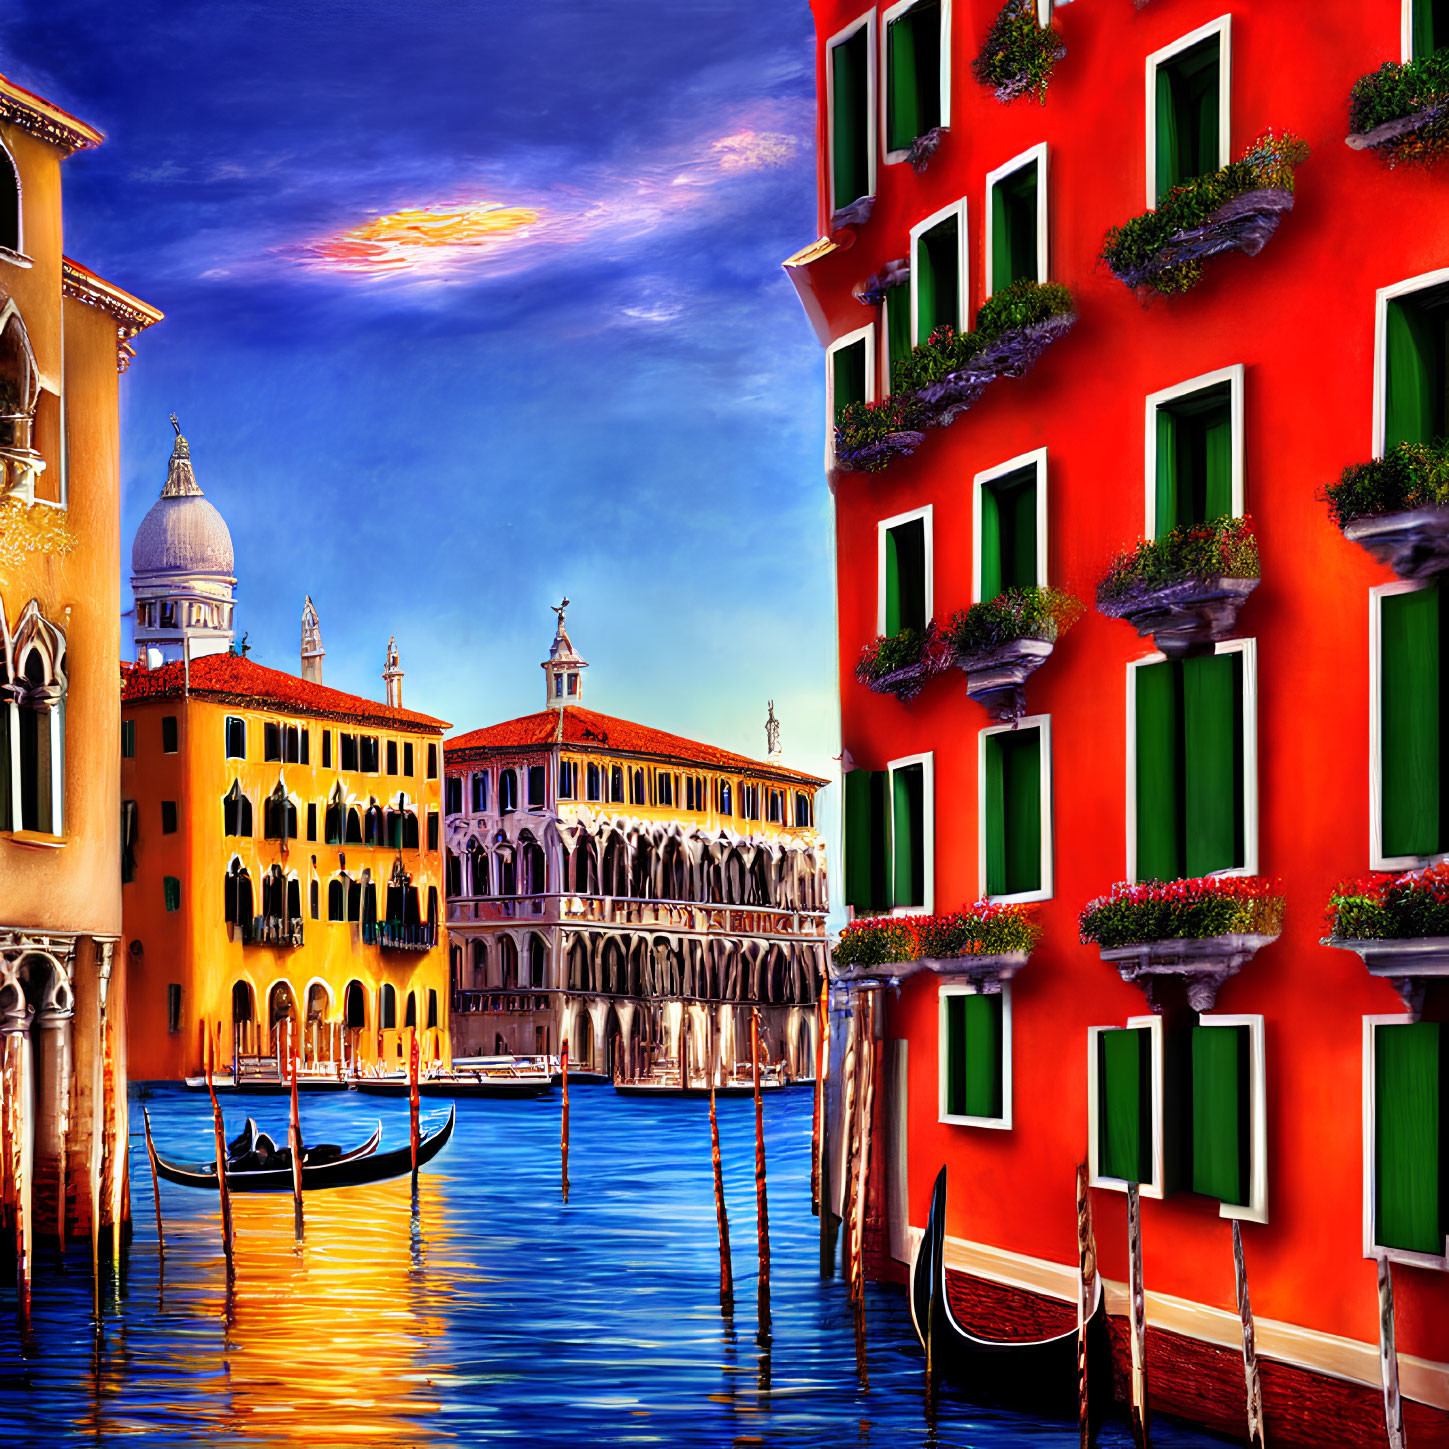 Venice painting: Red building, gondolas, Grand Canal at sunset